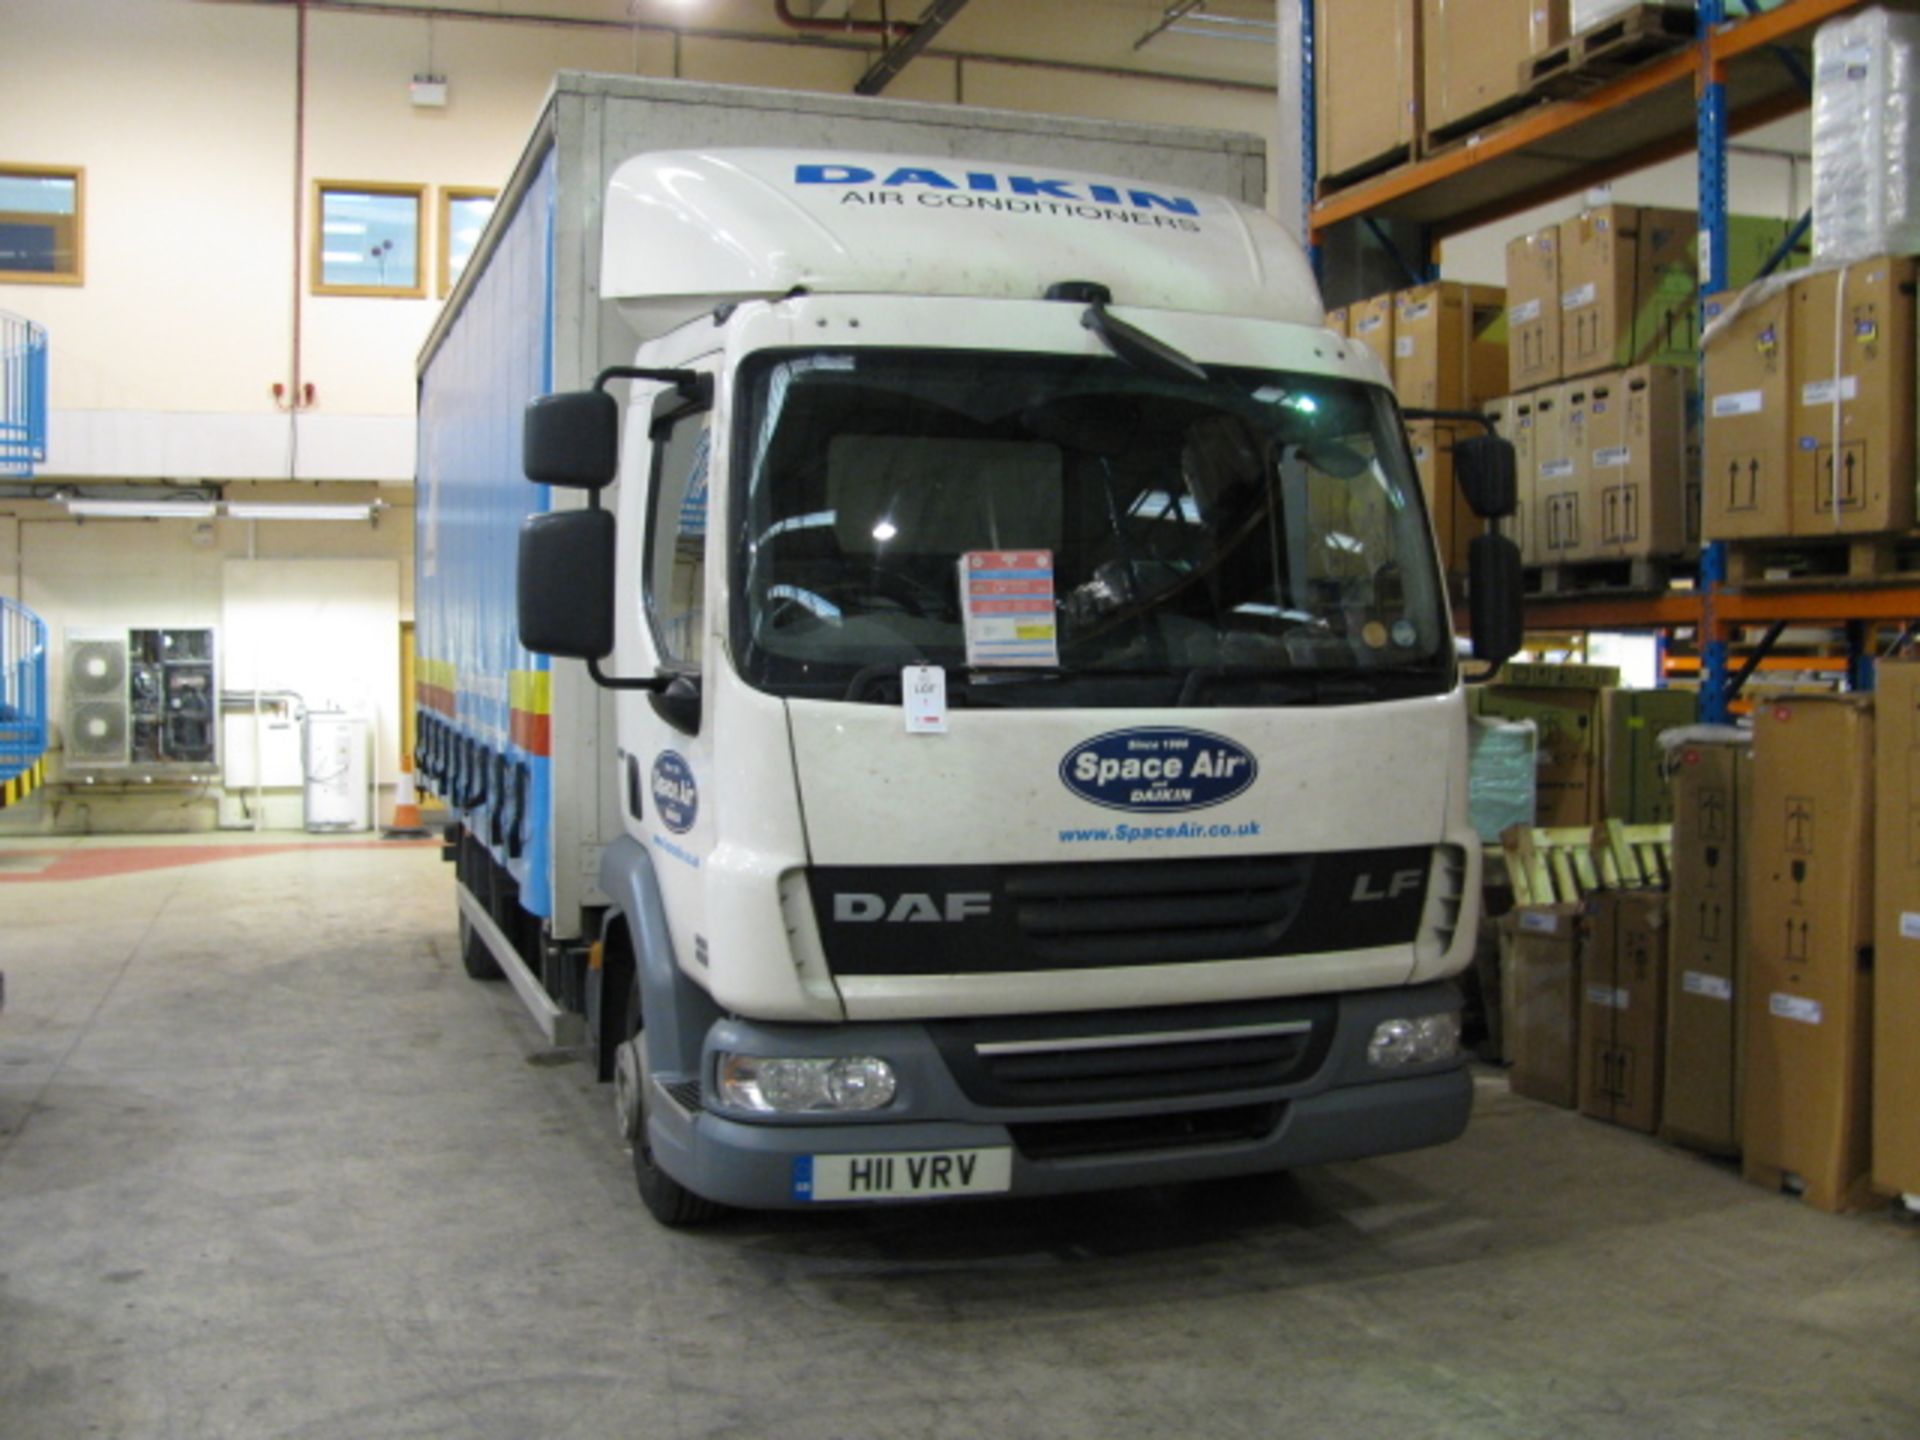 DAF lf 45.160 7.5t curtainside truck, reg H11 VRV, mileage 168315 approx. Please note: the tail...